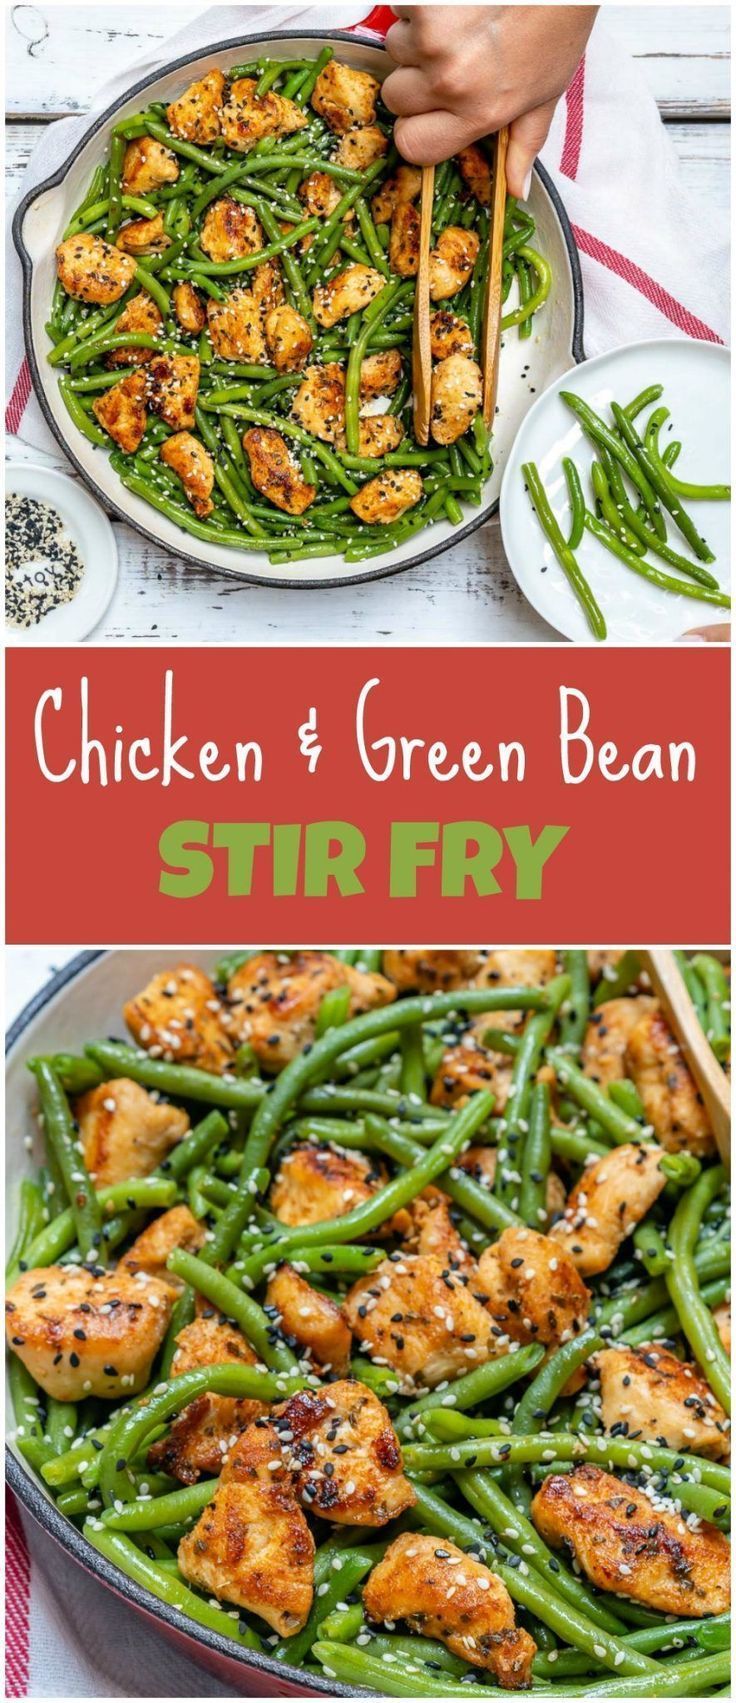 Chicken and Green Bean Stir Fry -   12 healthy recipes Fast clean eating ideas